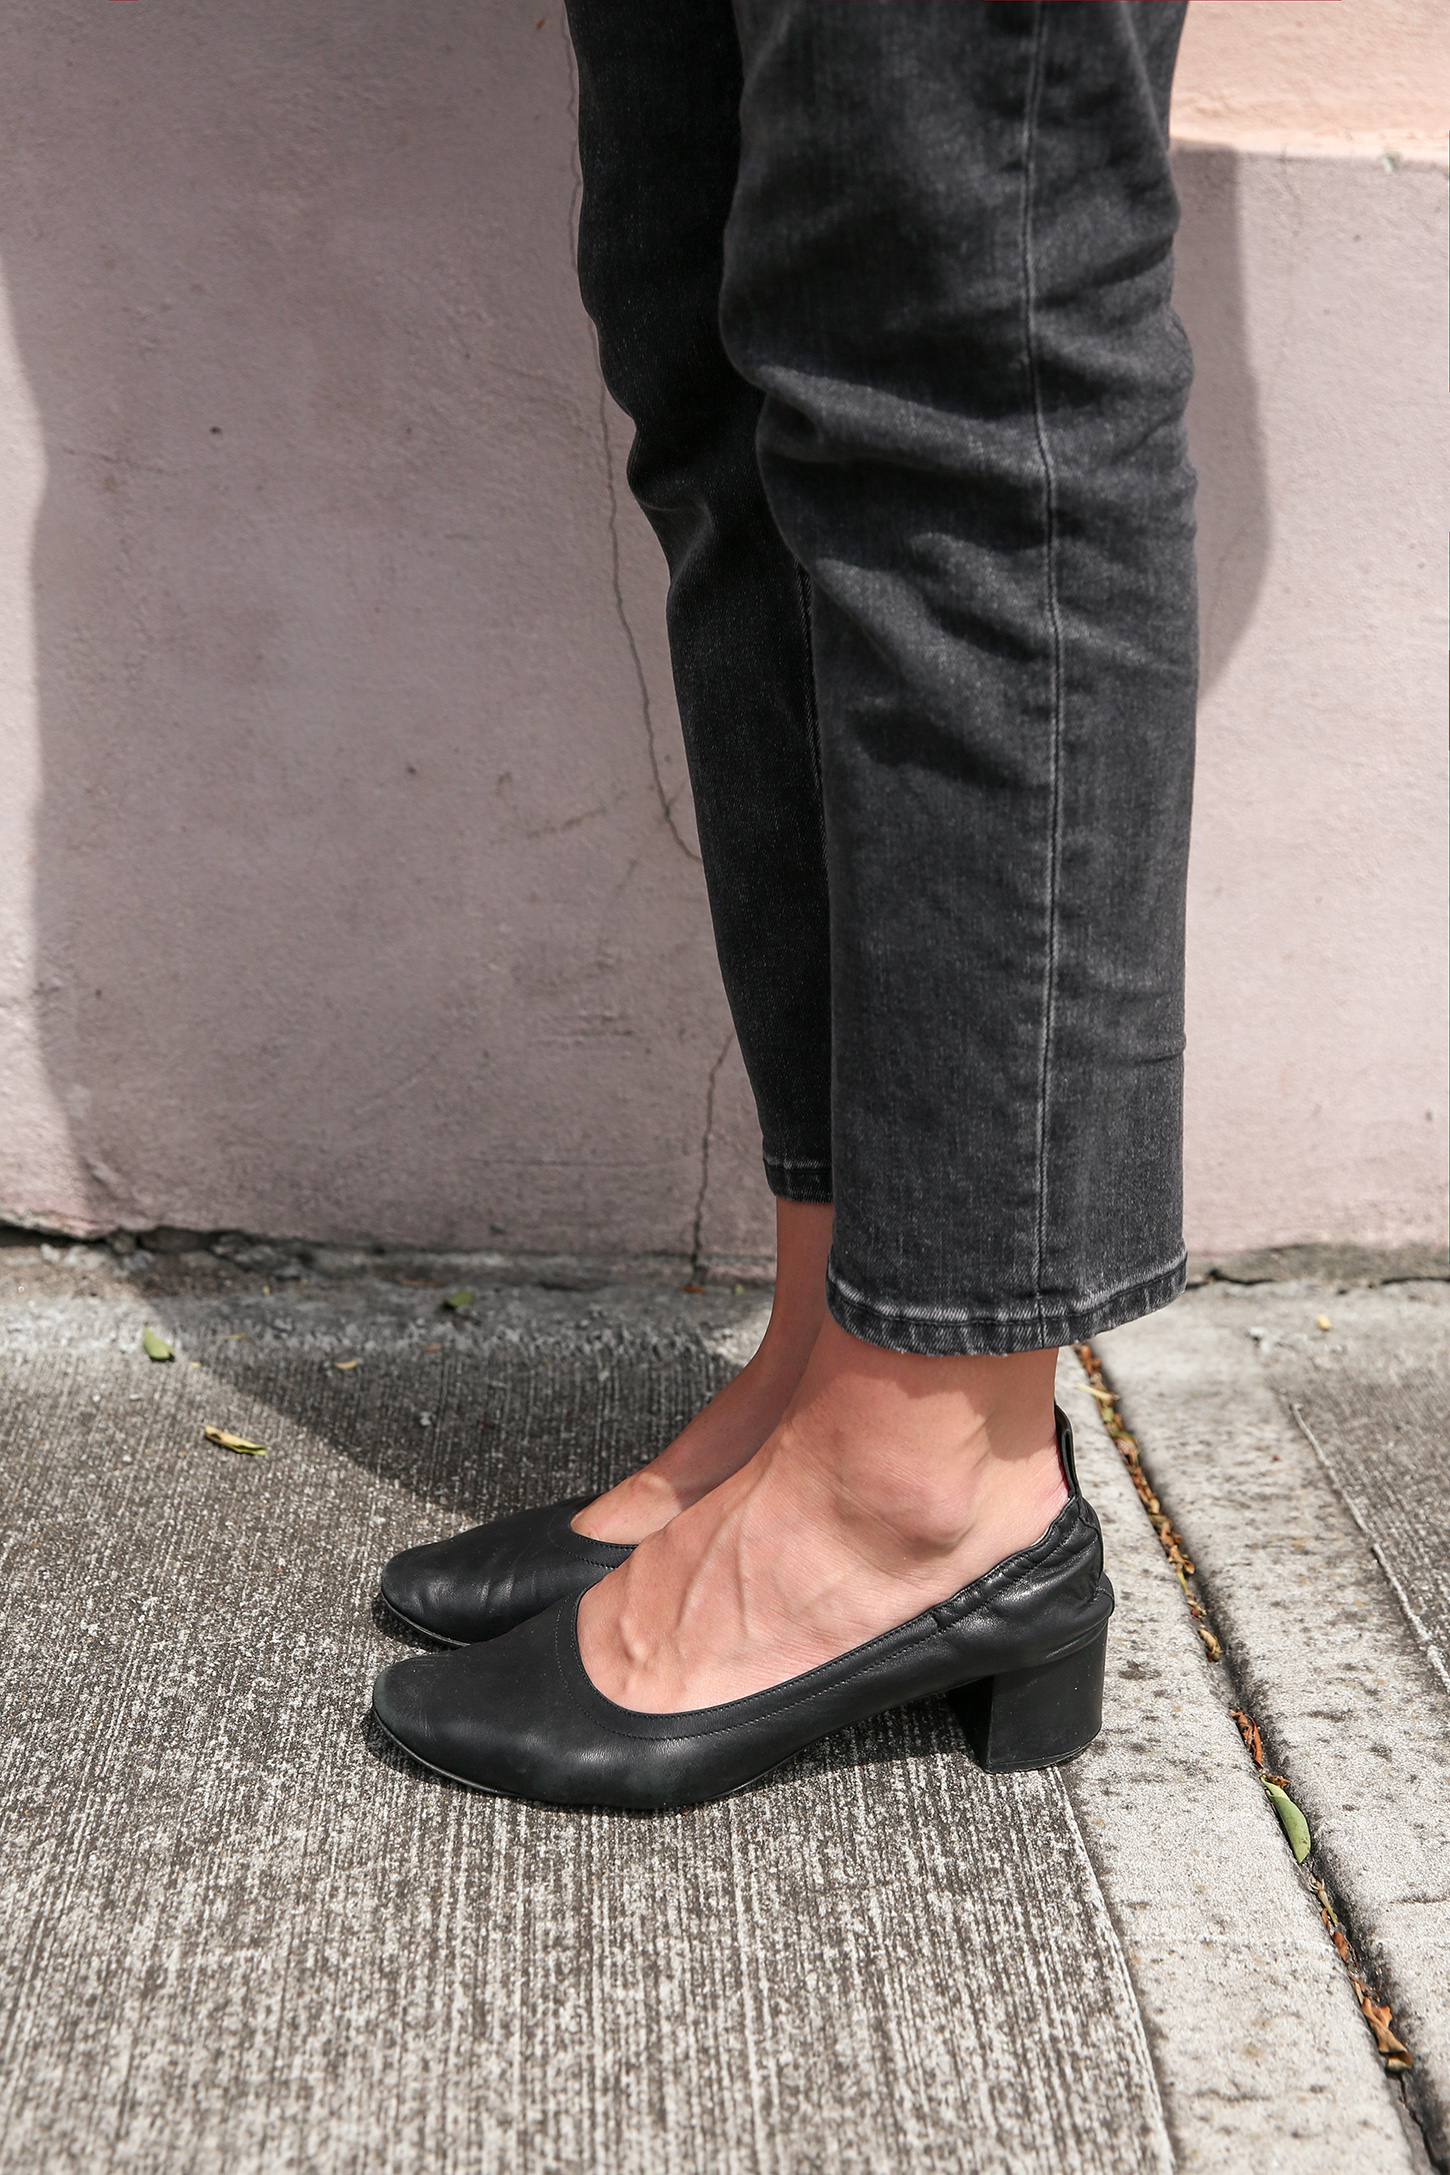 Updated Everlane Day Heel Review: 12+ 